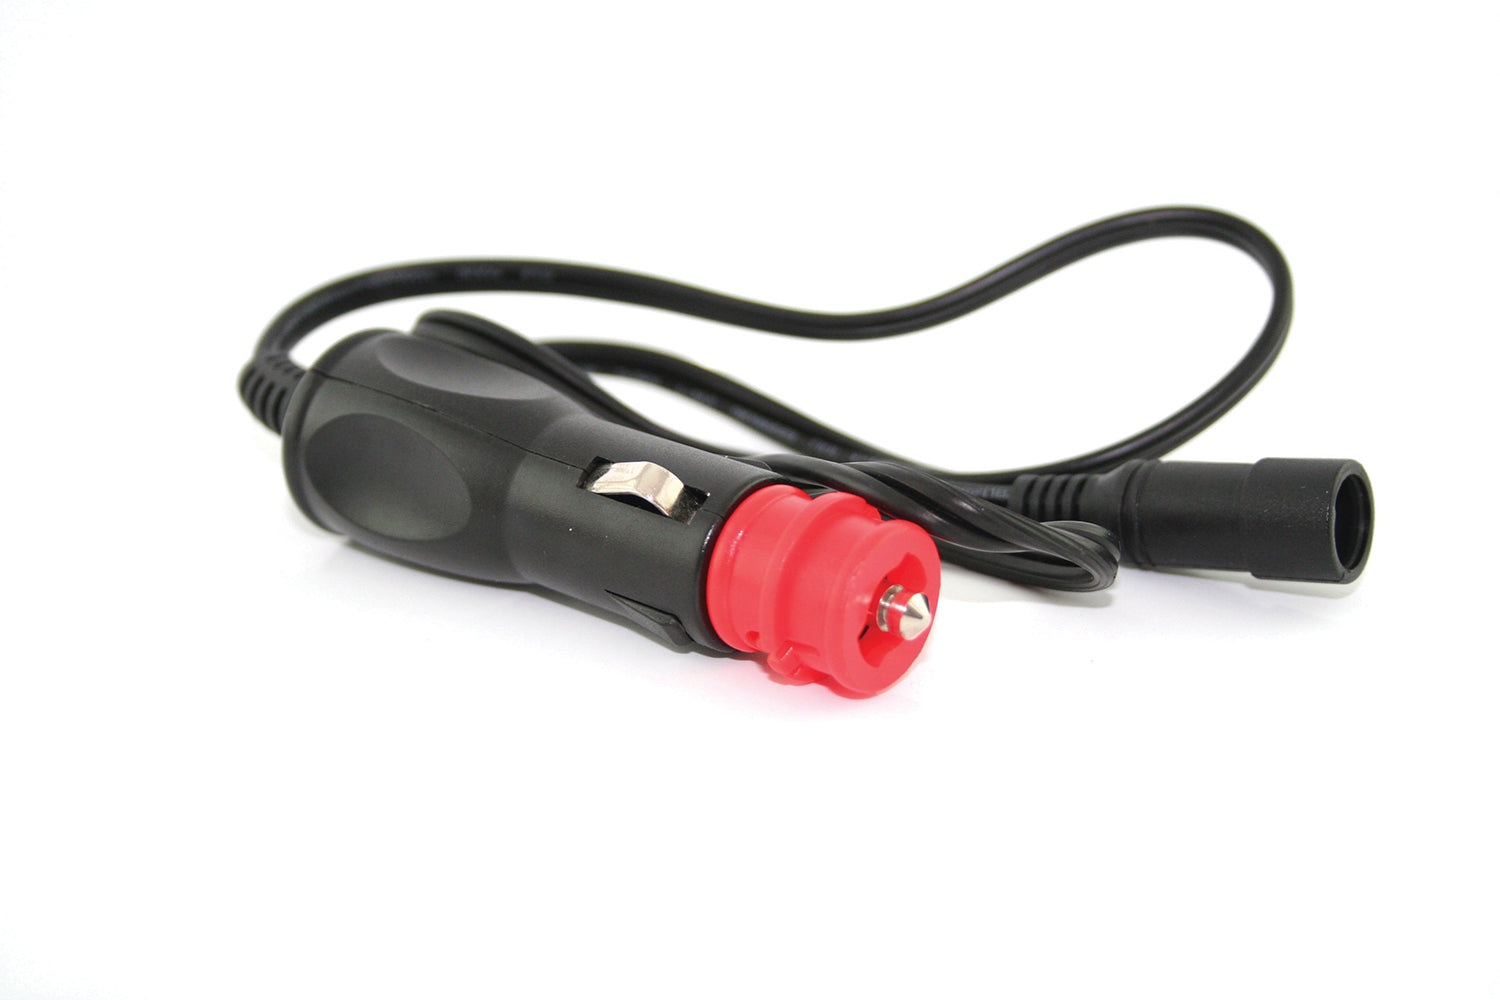 Keis heated clothing power lead for a motorcycle cigarette or DIN power socket